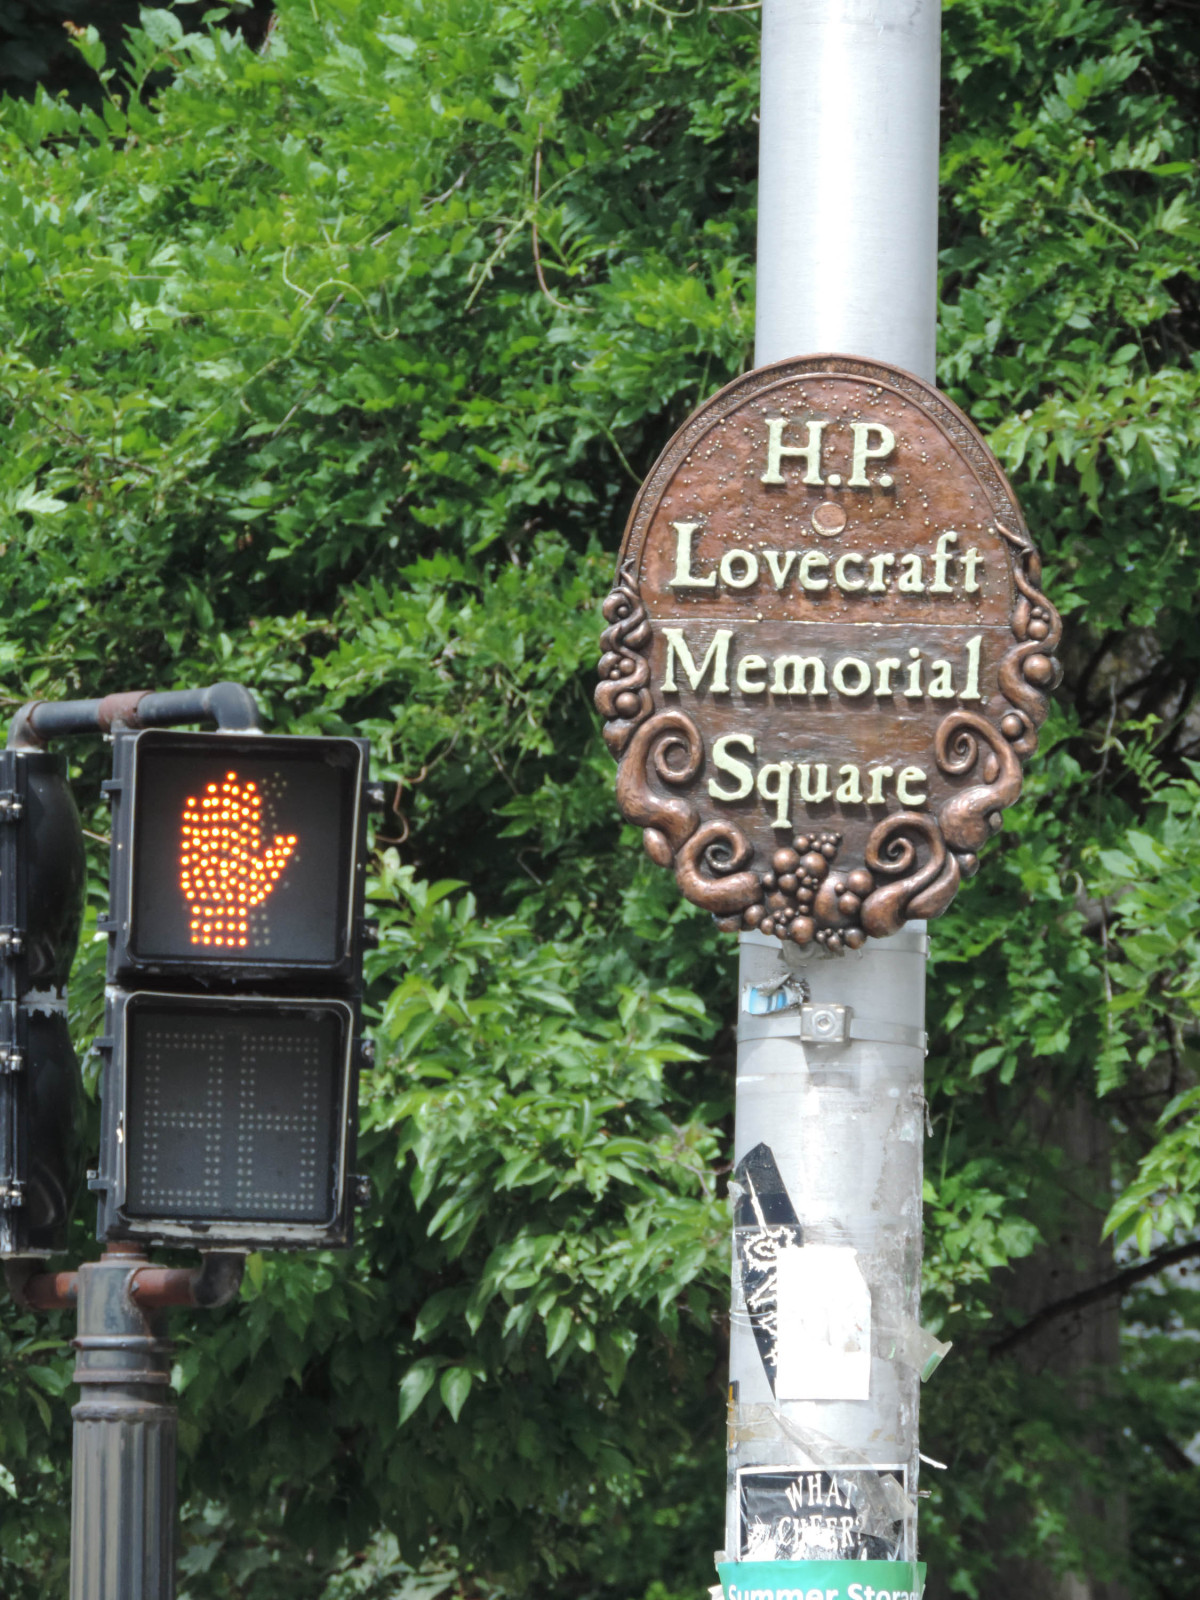 HP Lovecraft Memorial Square sign installed